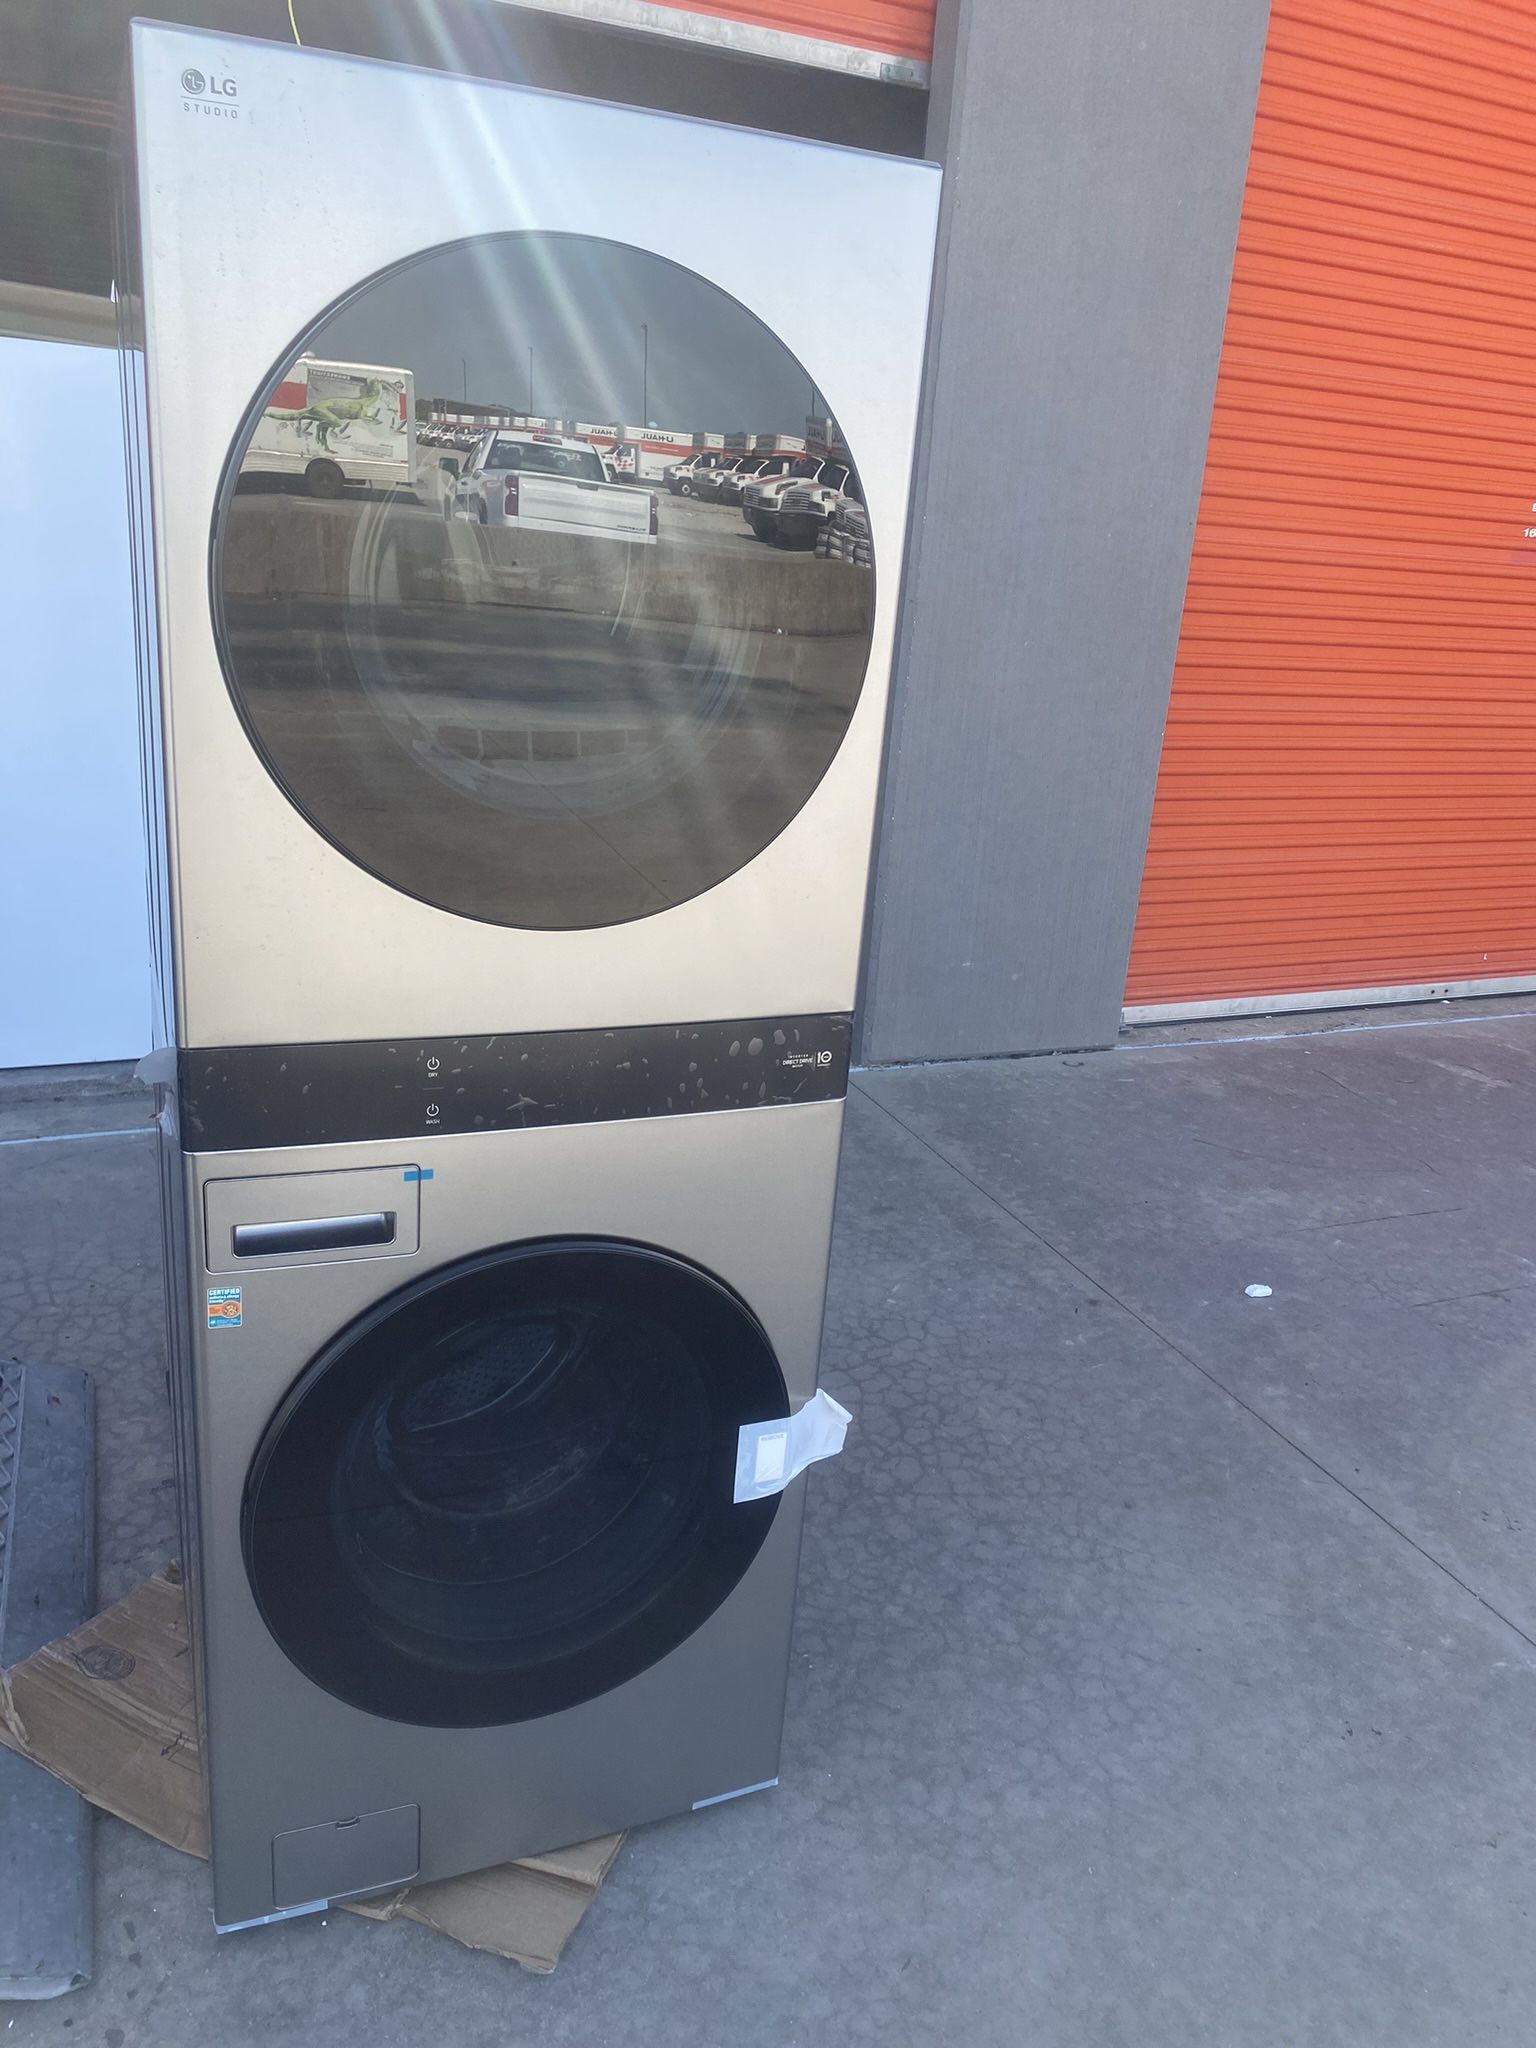 New Scratch & Dent LG STUDIO WashTower Gas Stacked Laundry Center with 5-cu ft Washer and 7.4-cu ft Dryer (ENERGY STAR) $1800.00 O.B.O.